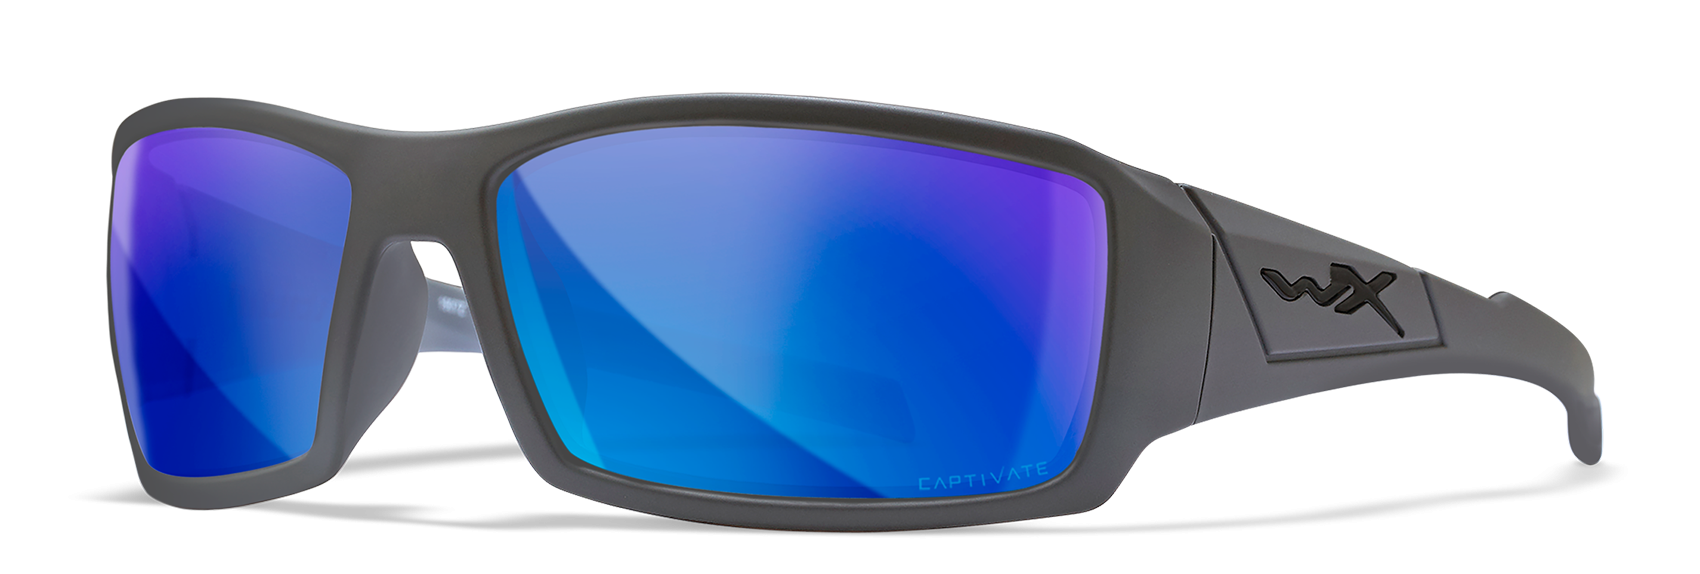 Wiley X Twisted Sunglasses, 2 colors